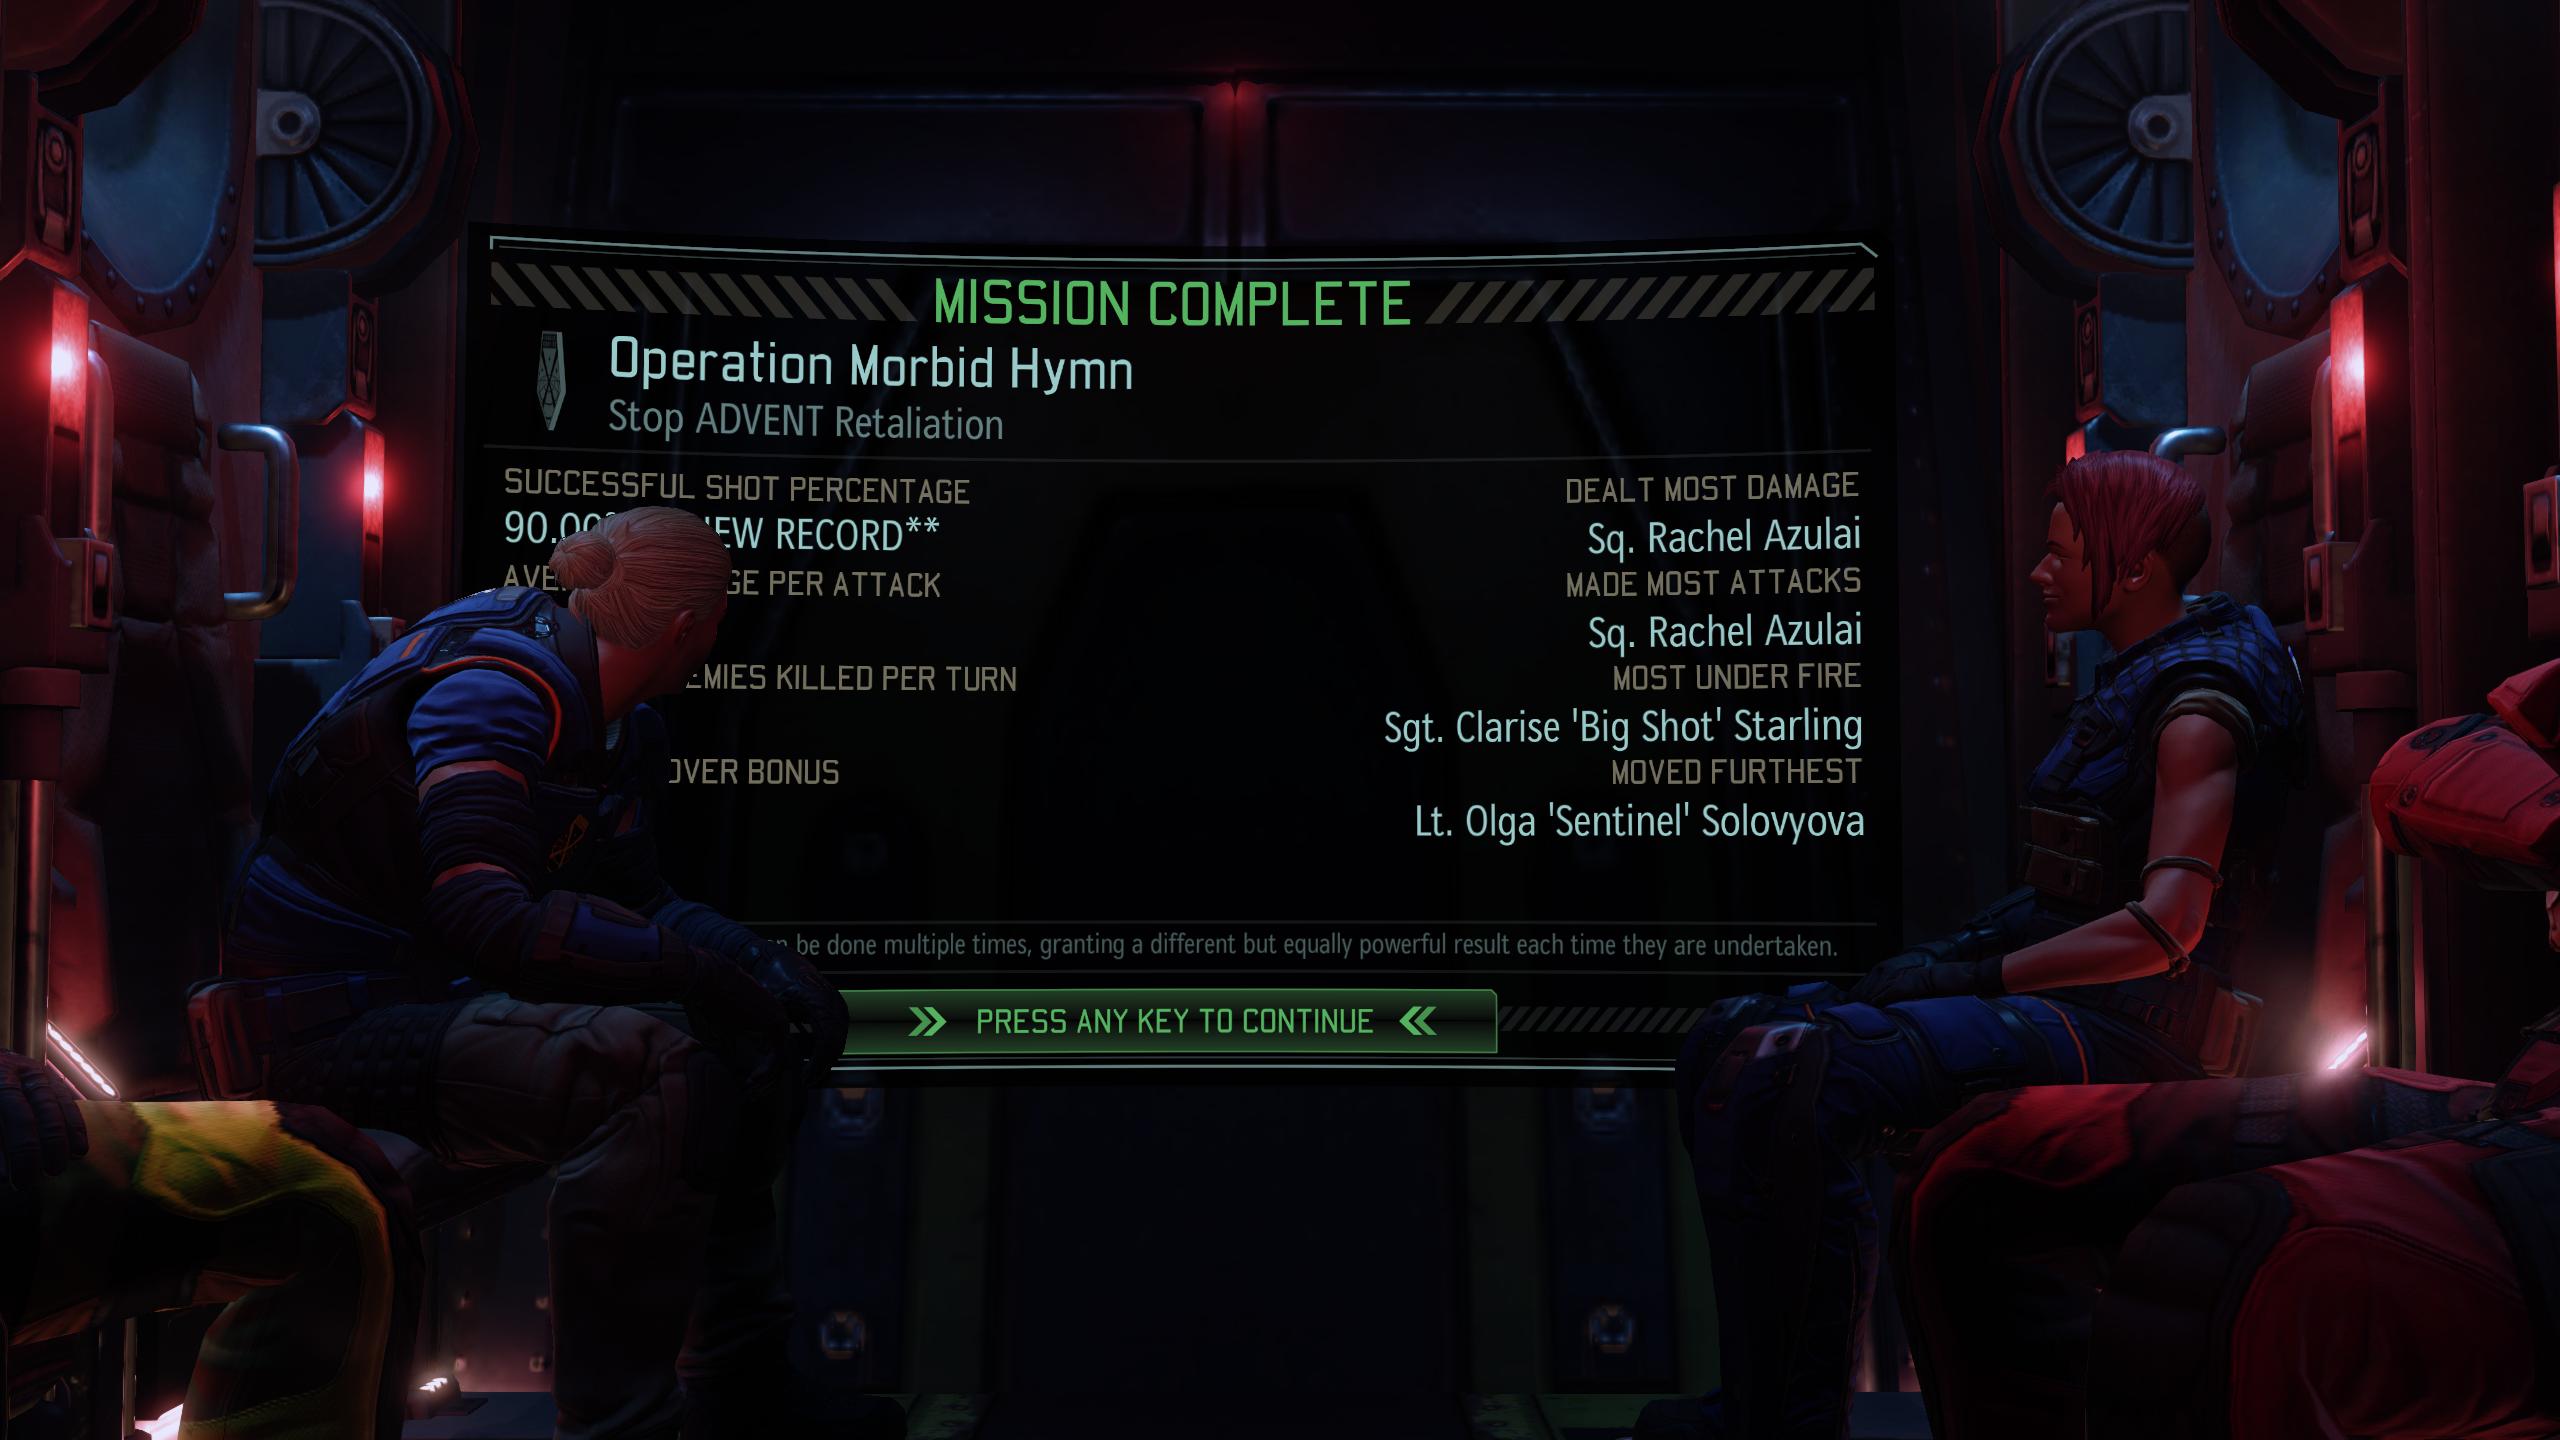 An Unlikely Fix For XCOM 2’s Long-Arse Back To Base Load Times